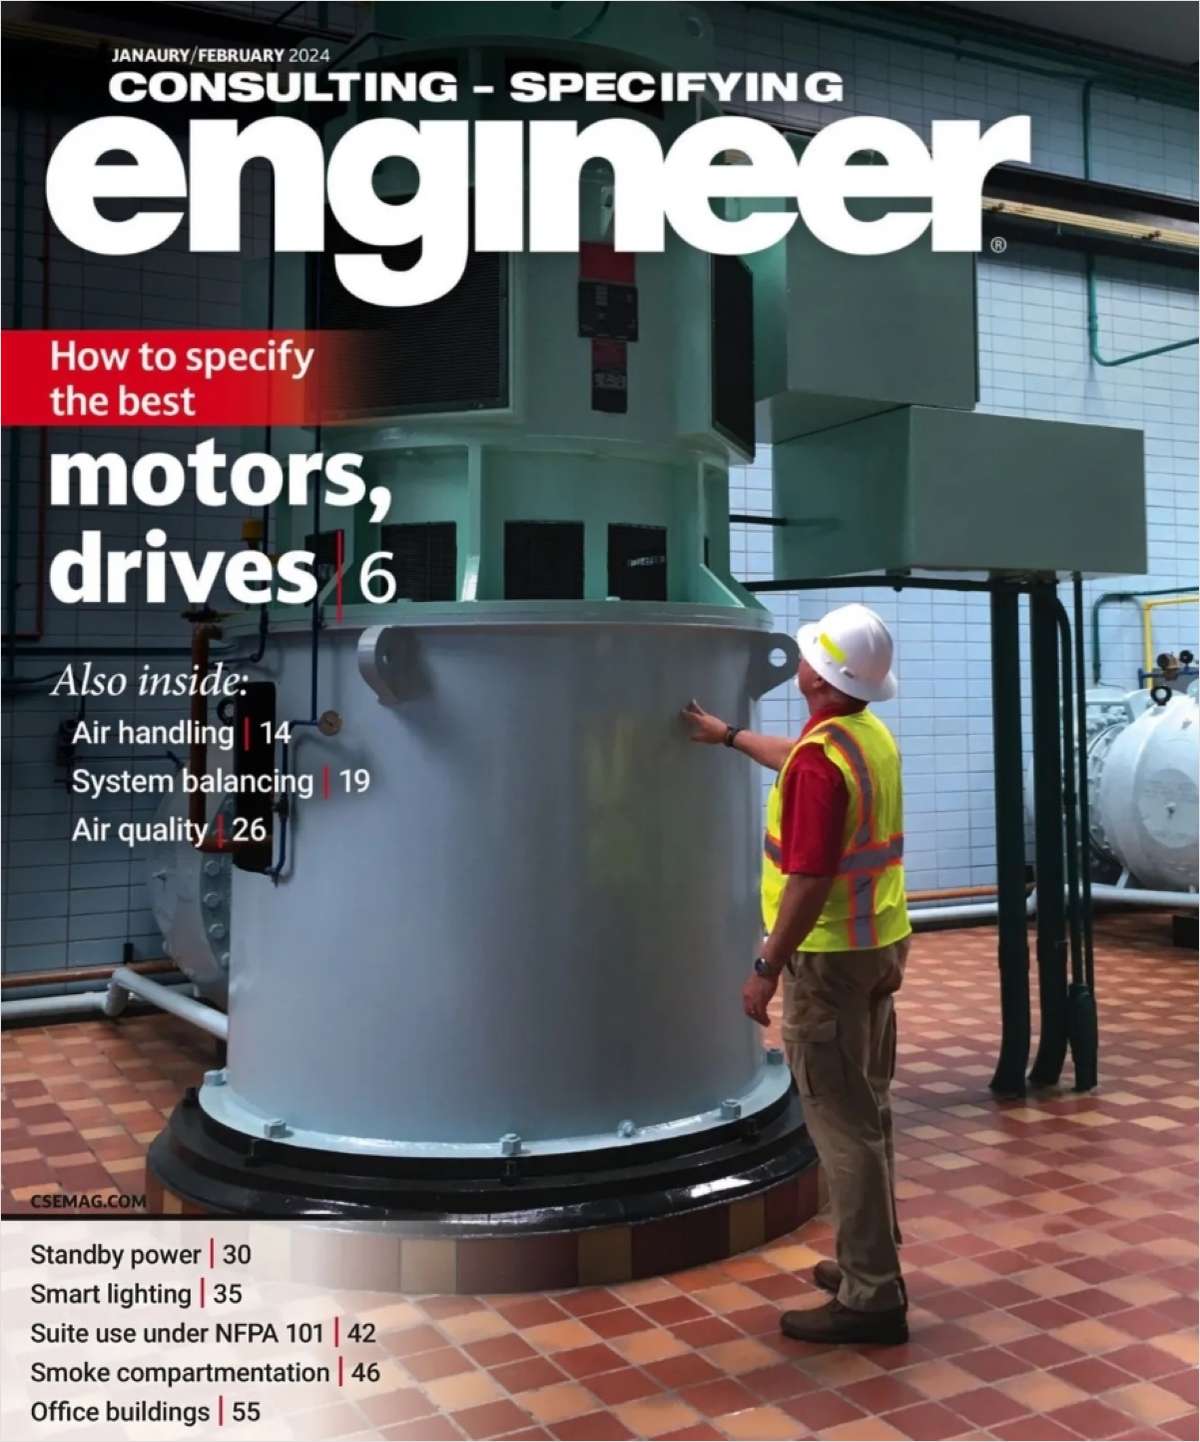 Consulting-Specifying Engineer Magazine